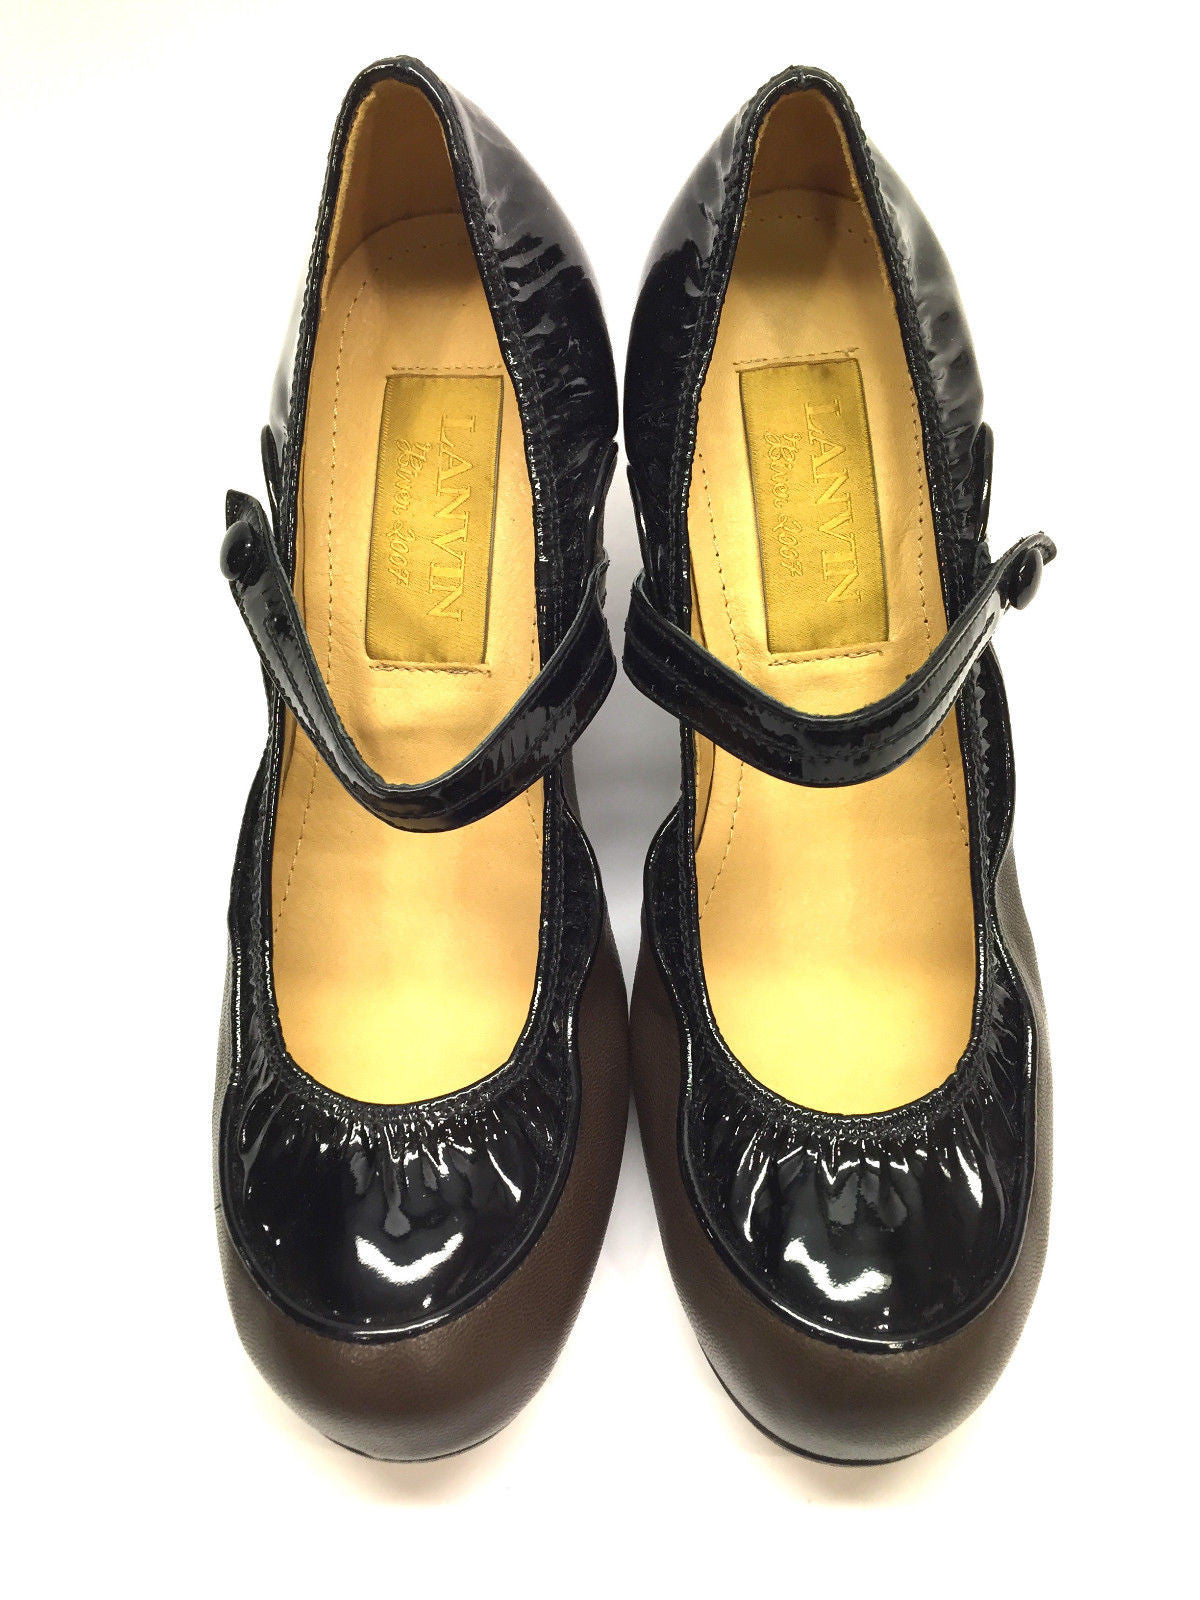 LANVIN Brown & Black Patent Leather Kitten-Heel Mary Jane Pumps Shoes ...